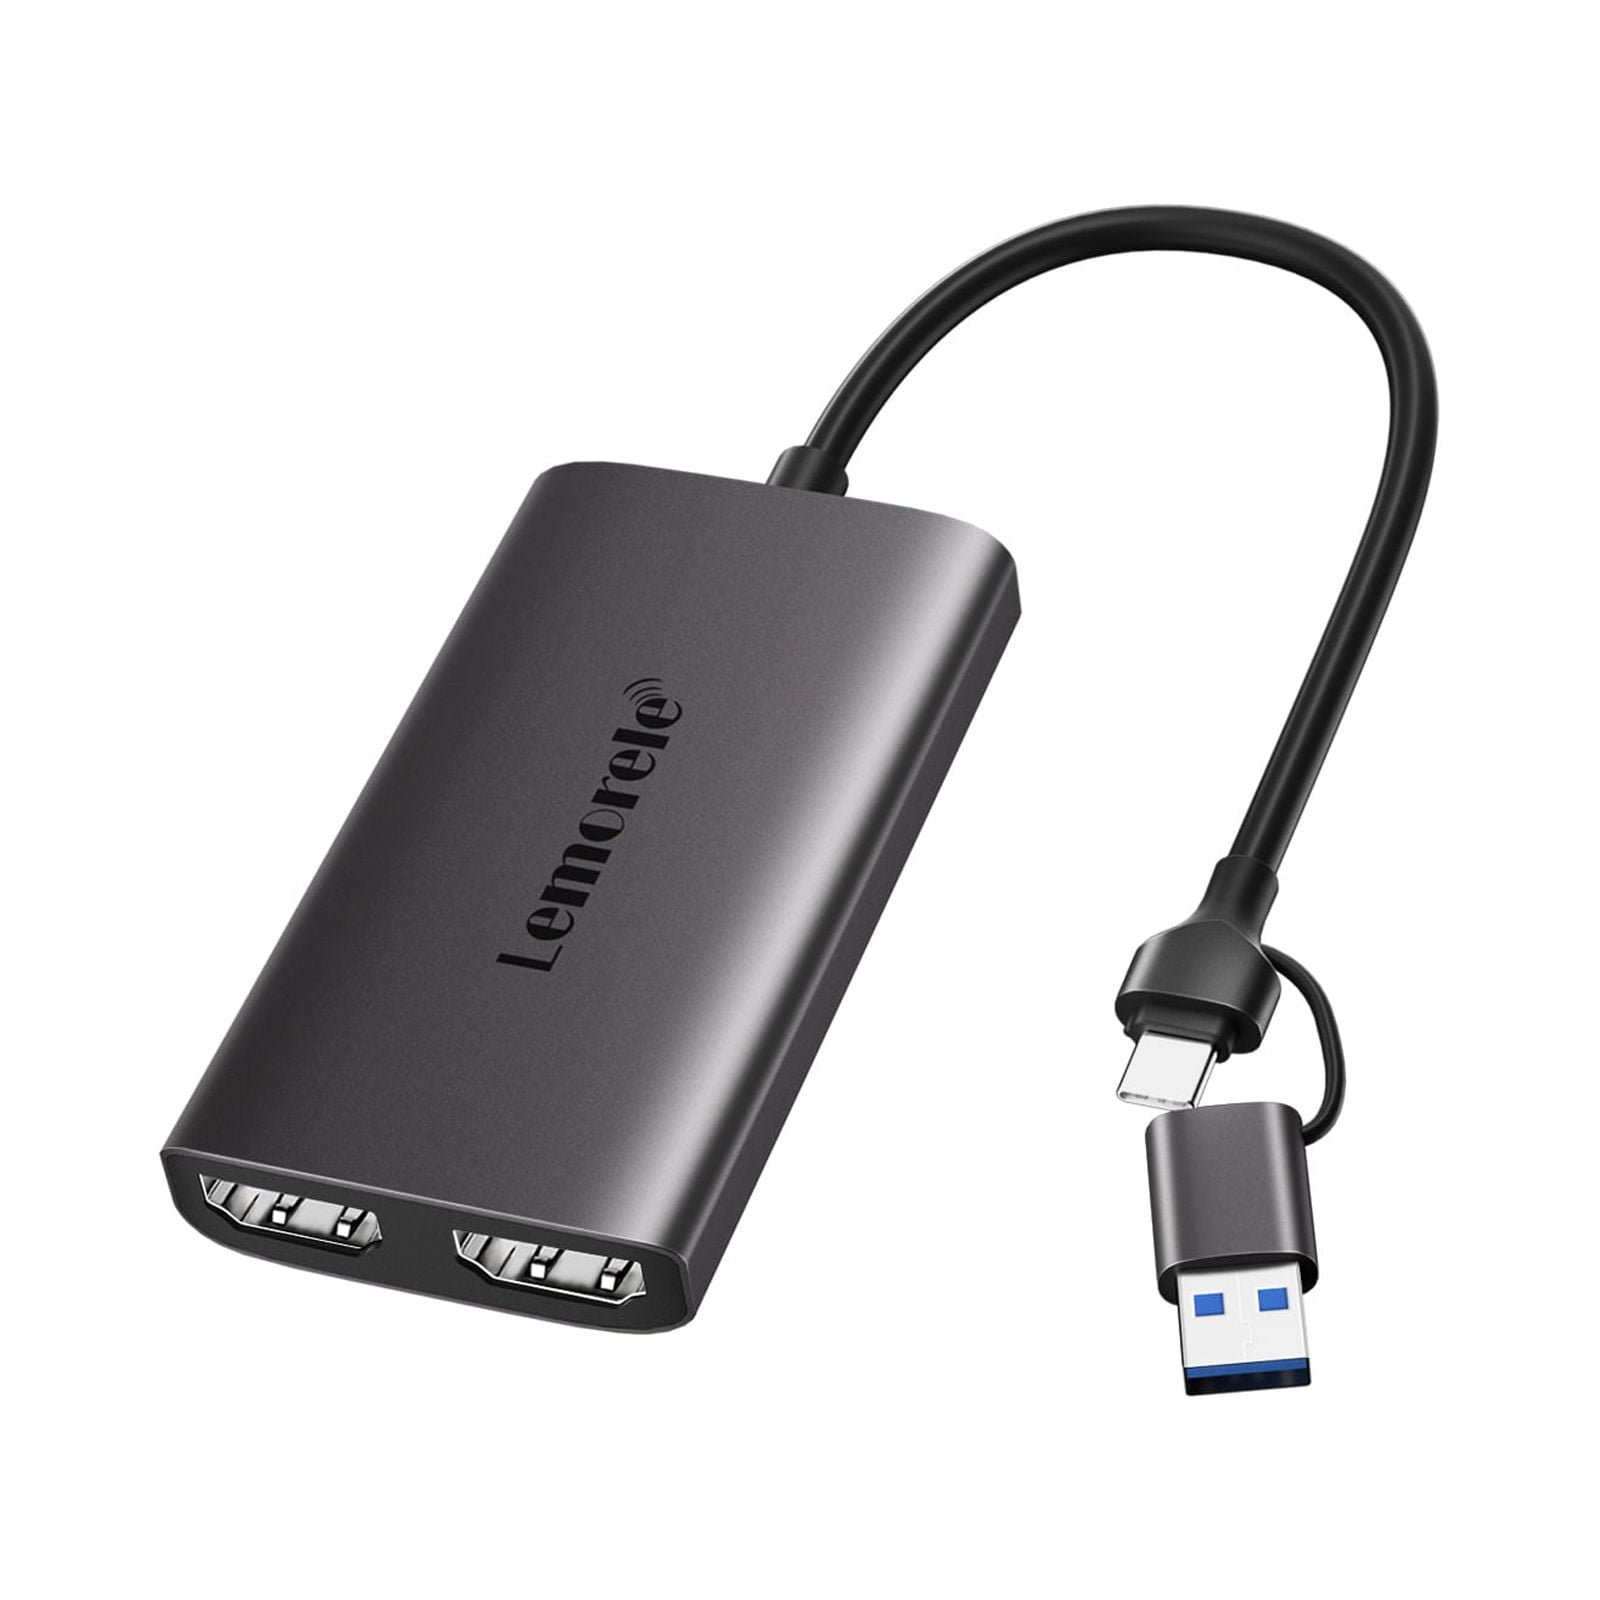 BASERY HDMI Audio Video Capture Cards USB 3.0 - High Definition1080P 6 –  Basery Electronic Store